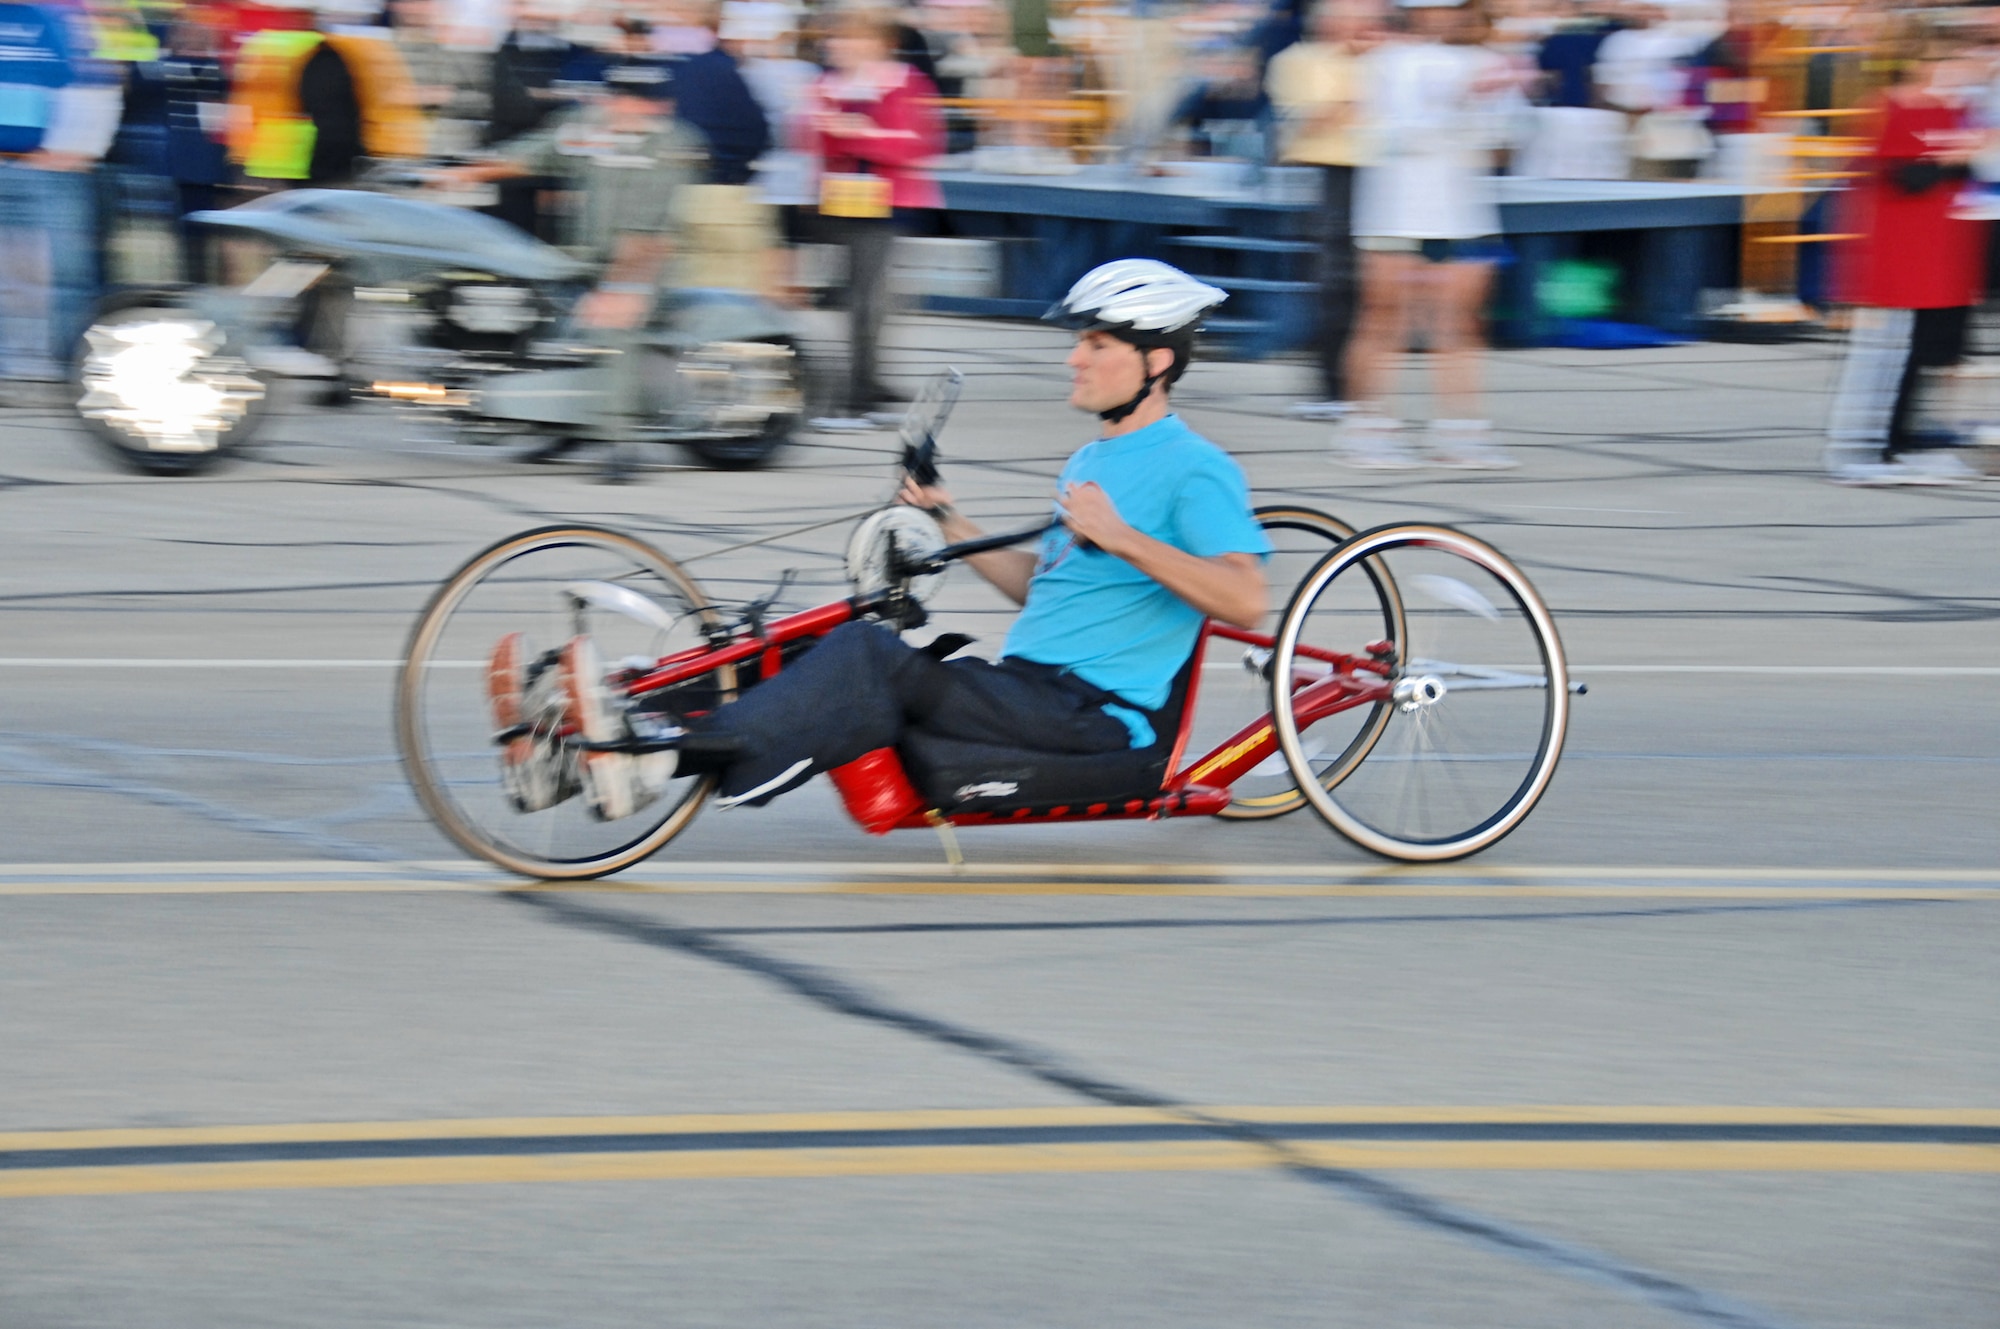 John Moore of Centerville, Ohio, pilots a hand cycle during the U.S. Air Force Marathon Sept. 19, 2009 at Wright-Patterson Air Force Base, Ohio. Moore was paralyzed from the waist down in Septermber 2008 during an accident following the passage of Hurricane Ike. He is a firefighter with the city of Kettering, Ohio. He finished the 26.2 miles averaging just over 5 minutes per mile.  His wife Meredyth ran the half marathon. (Air Force photo/Ben Strasser)